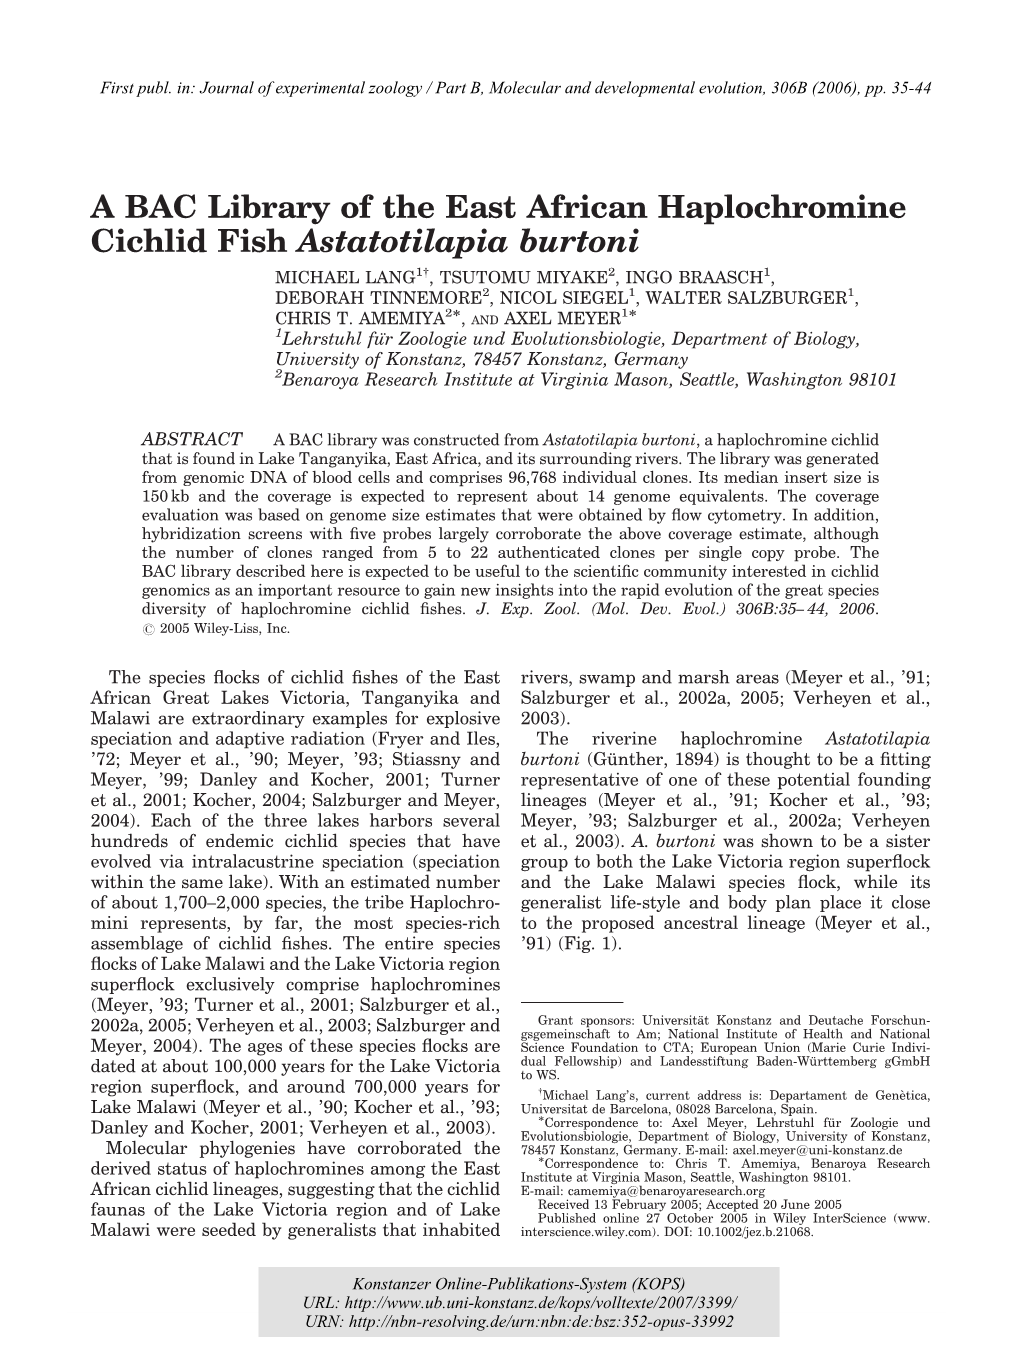 A BAC Library of the East African Haplochromine Cichlid Fish